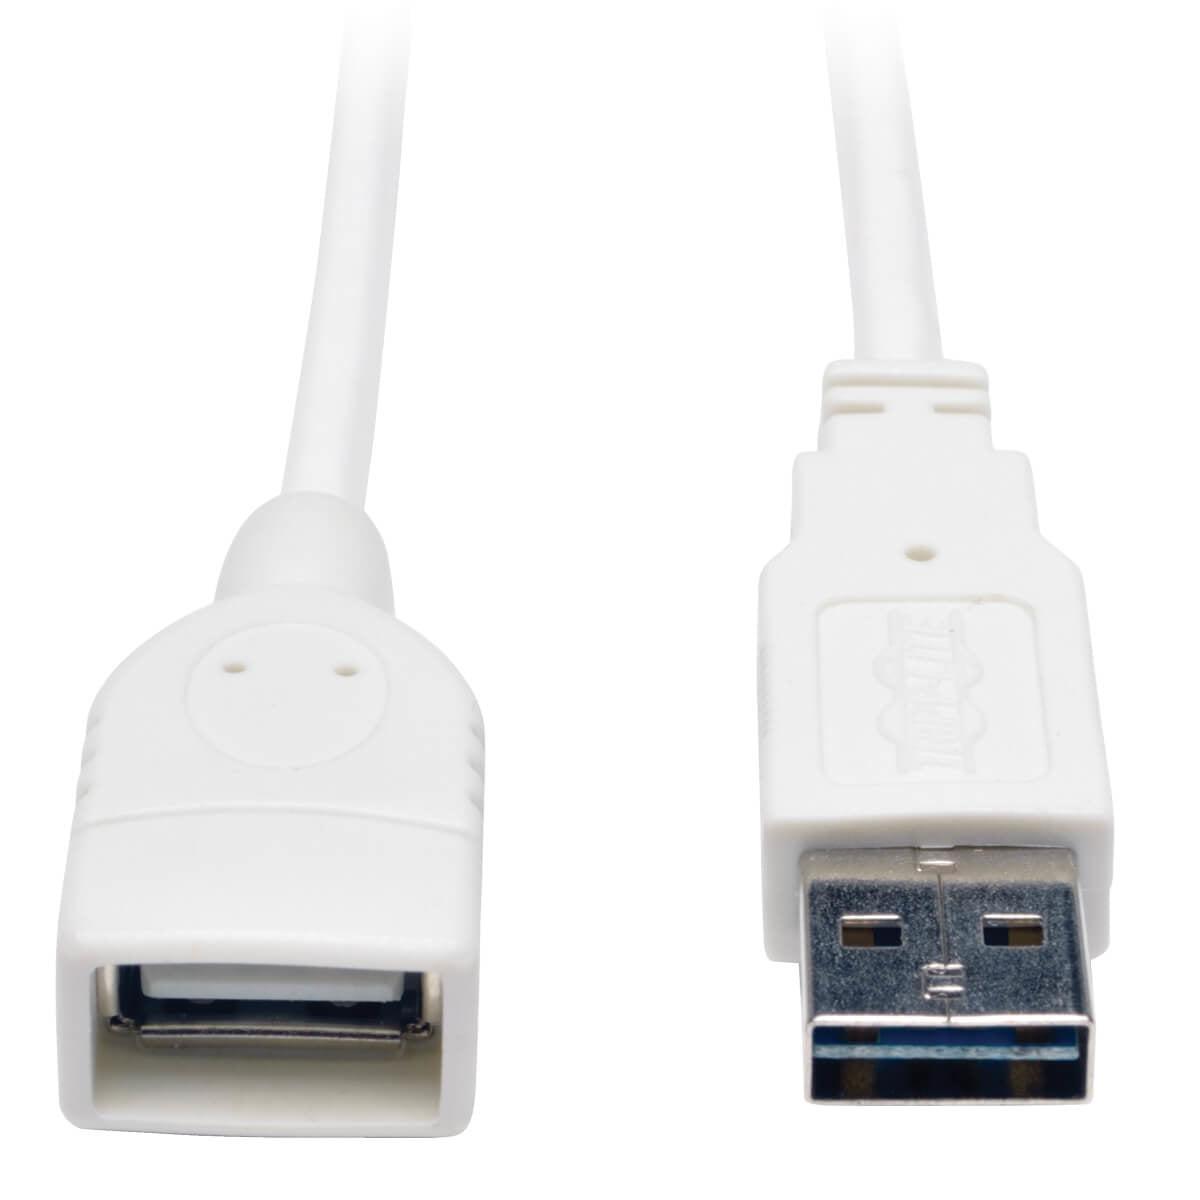 Tripp Lite Ur024-010-Wh Universal Reversible Usb 2.0 Extension Cable (Reversible A To A M/F), White, 10 Ft. (3.05 M)